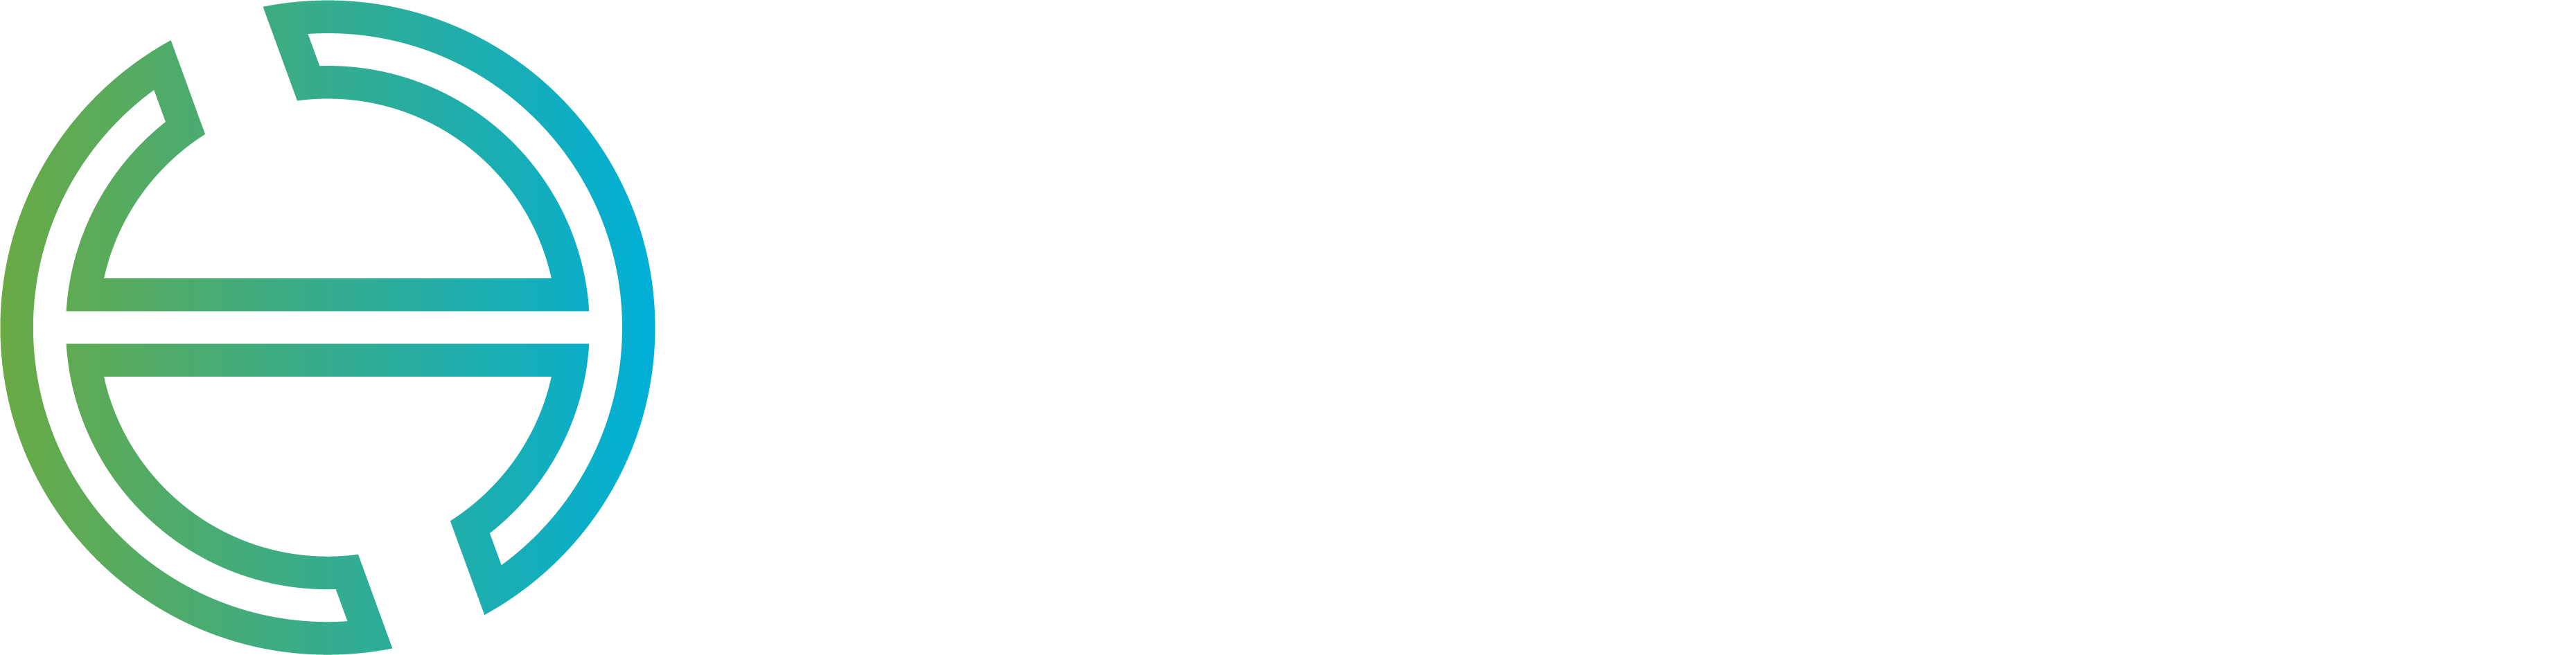 Hydron wide white text